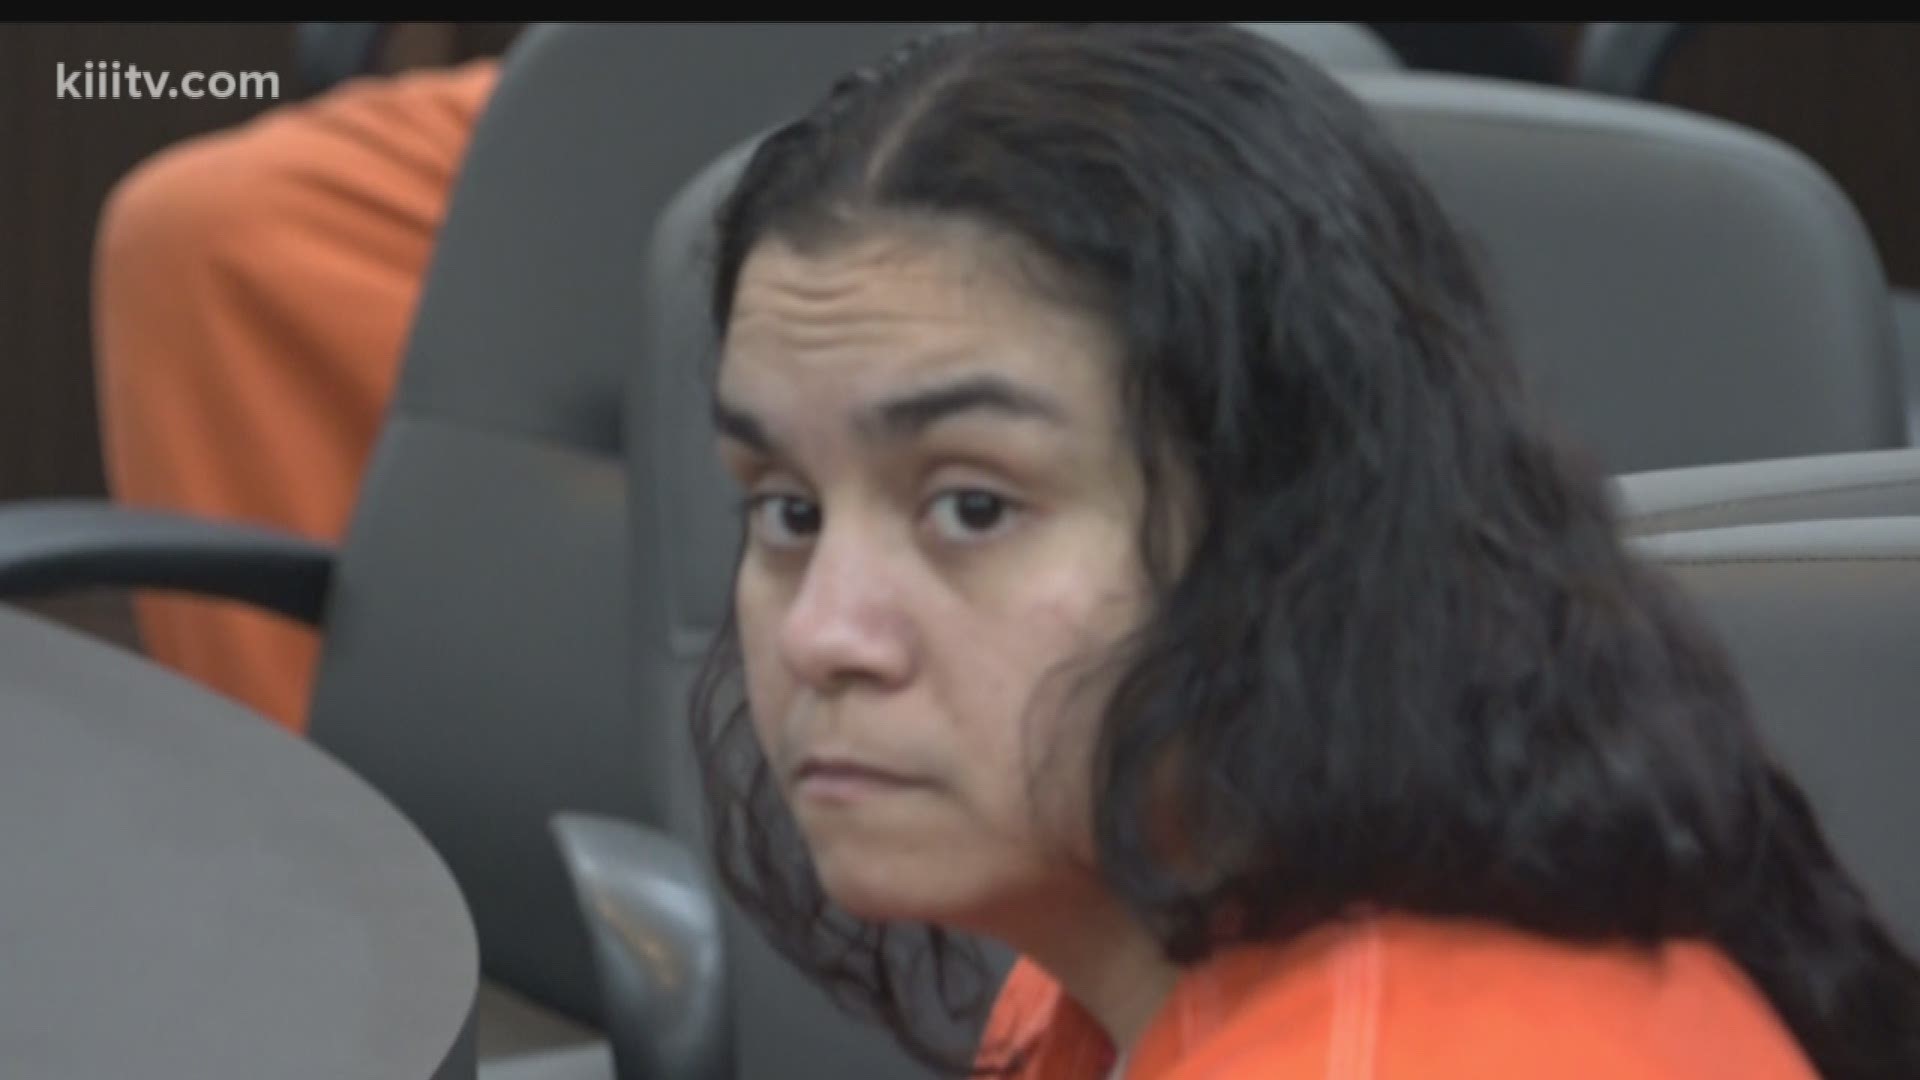 A woman accused of trying to sell off her son to pay a drug debt made an appearance Friday at the Nueces County Courthouse to make a plea deal.